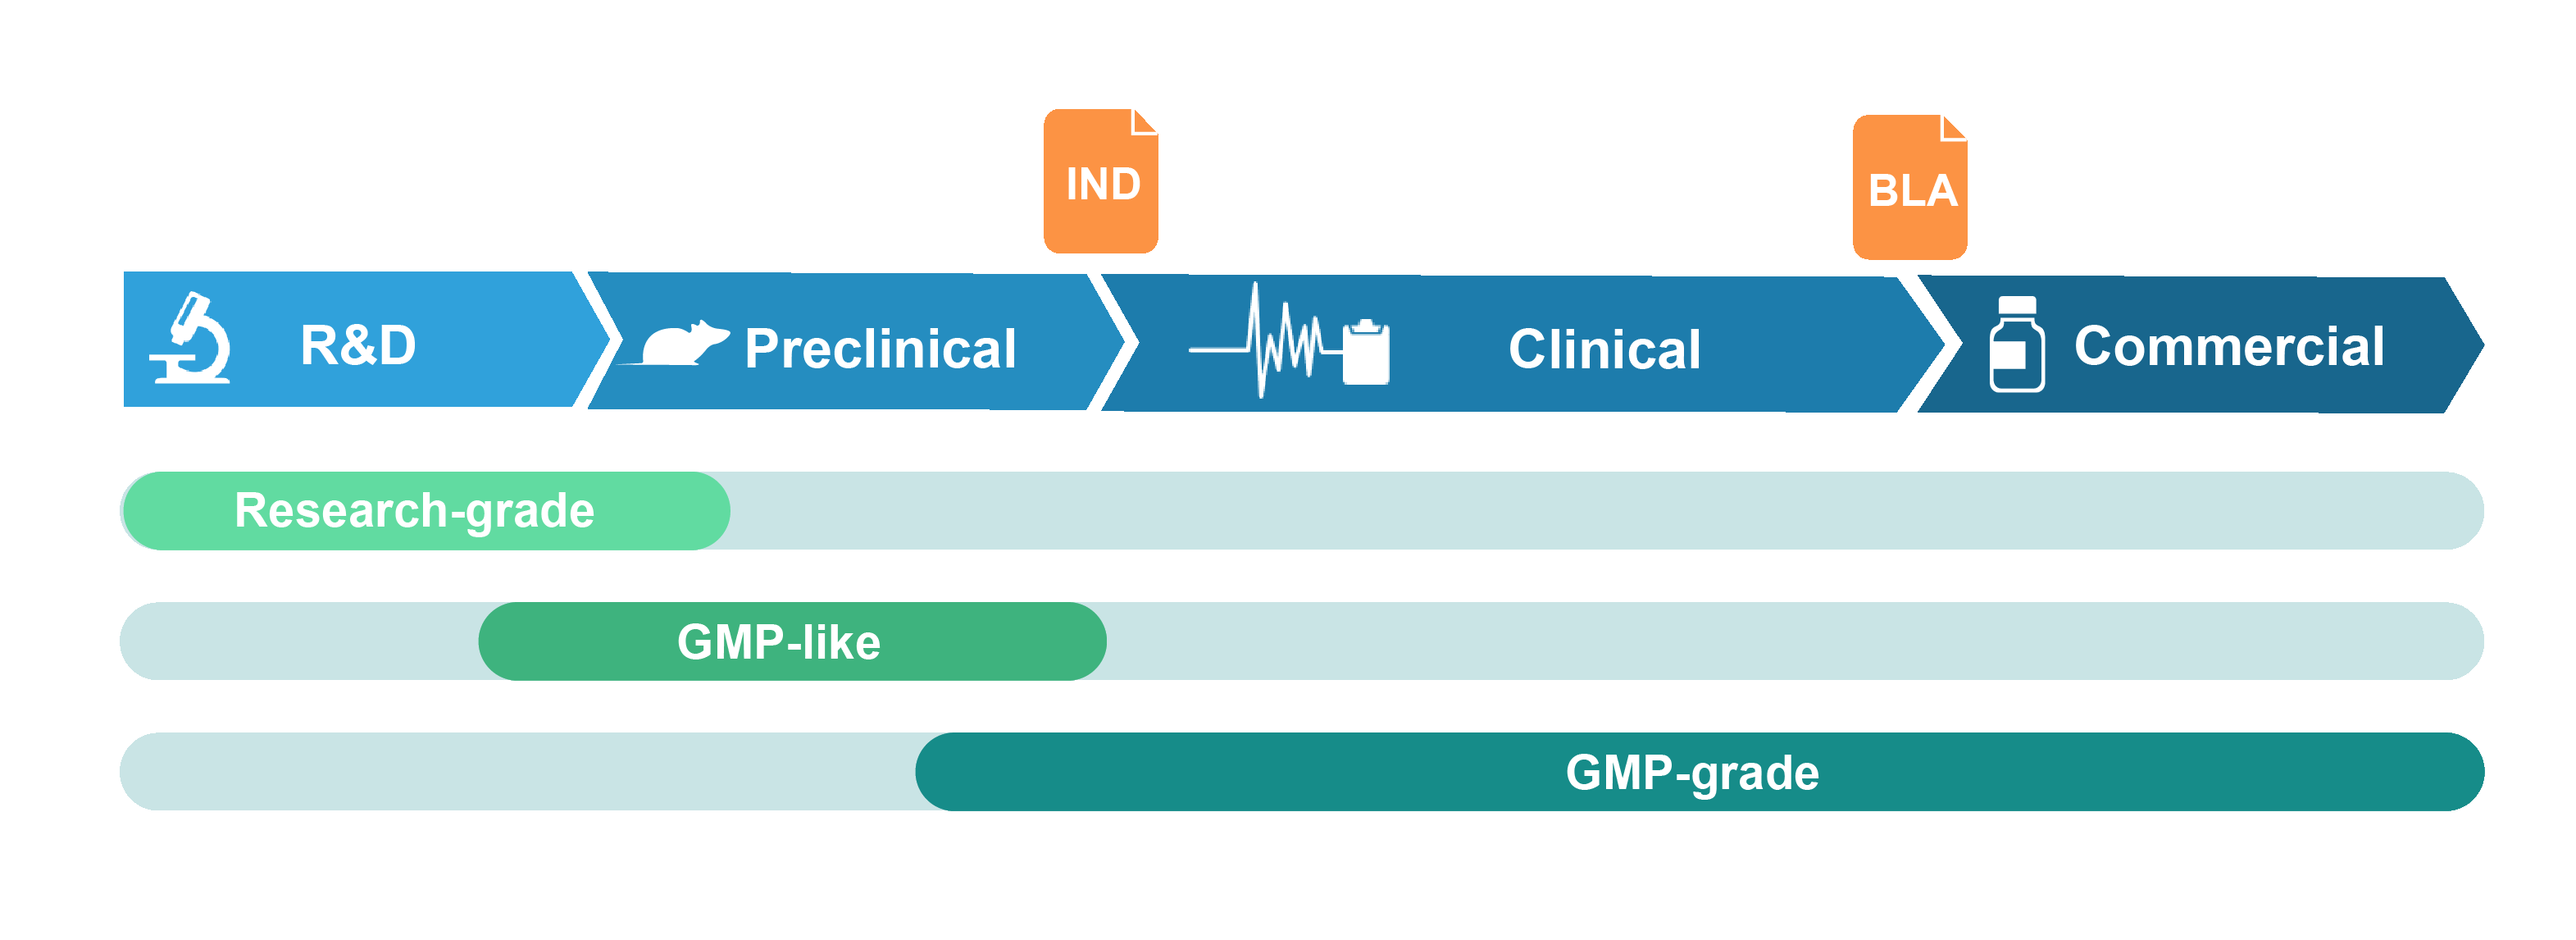 GMP-like plasmid for preclinical studies and GMP-grade plasmid for clinical and commercial use.